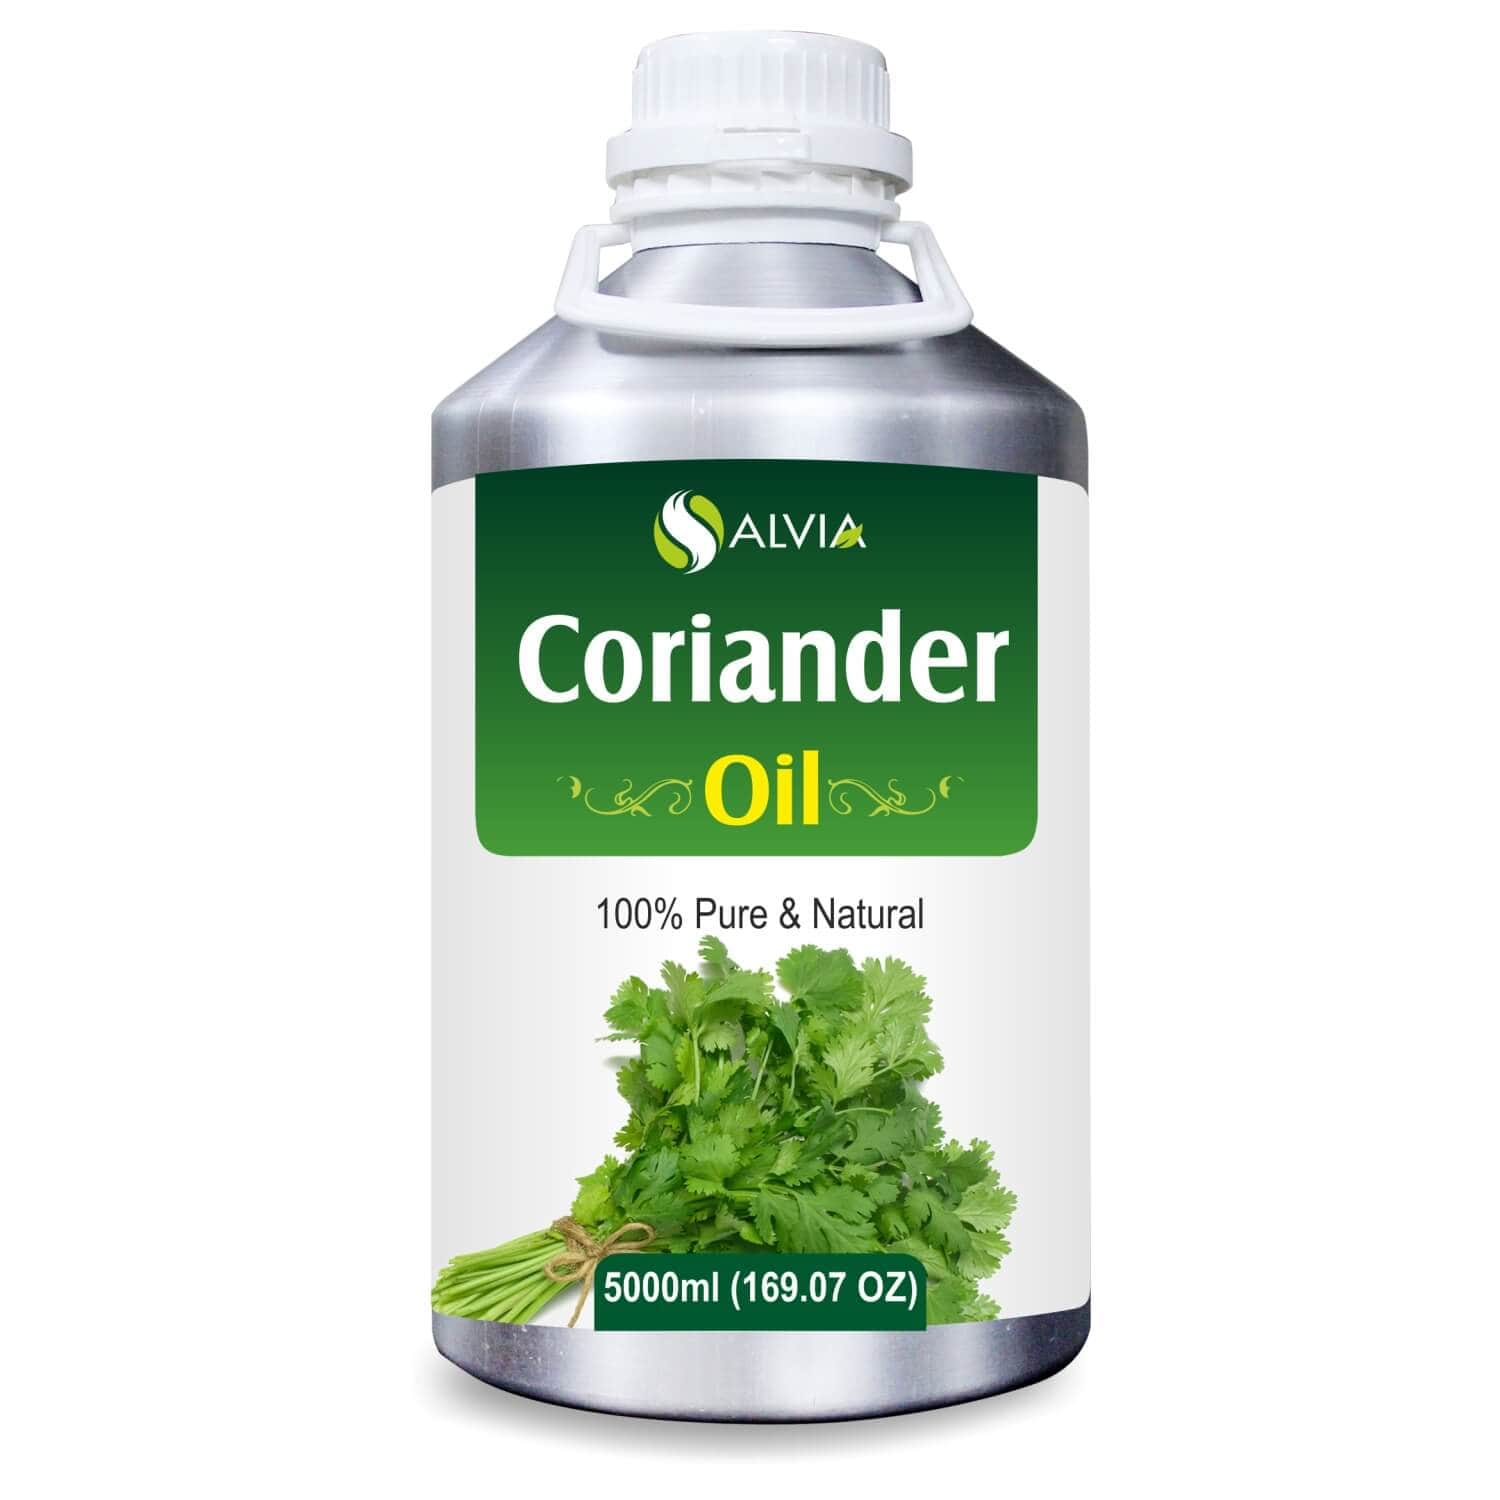 Salvia Natural Essential Oils 5000ml Coriander Oil (Coriandrum sativum) 100% Natural Pure Essential Oil Fights Bacteria, Relieves Pain, Clears Complexion, Promotes Relaxation